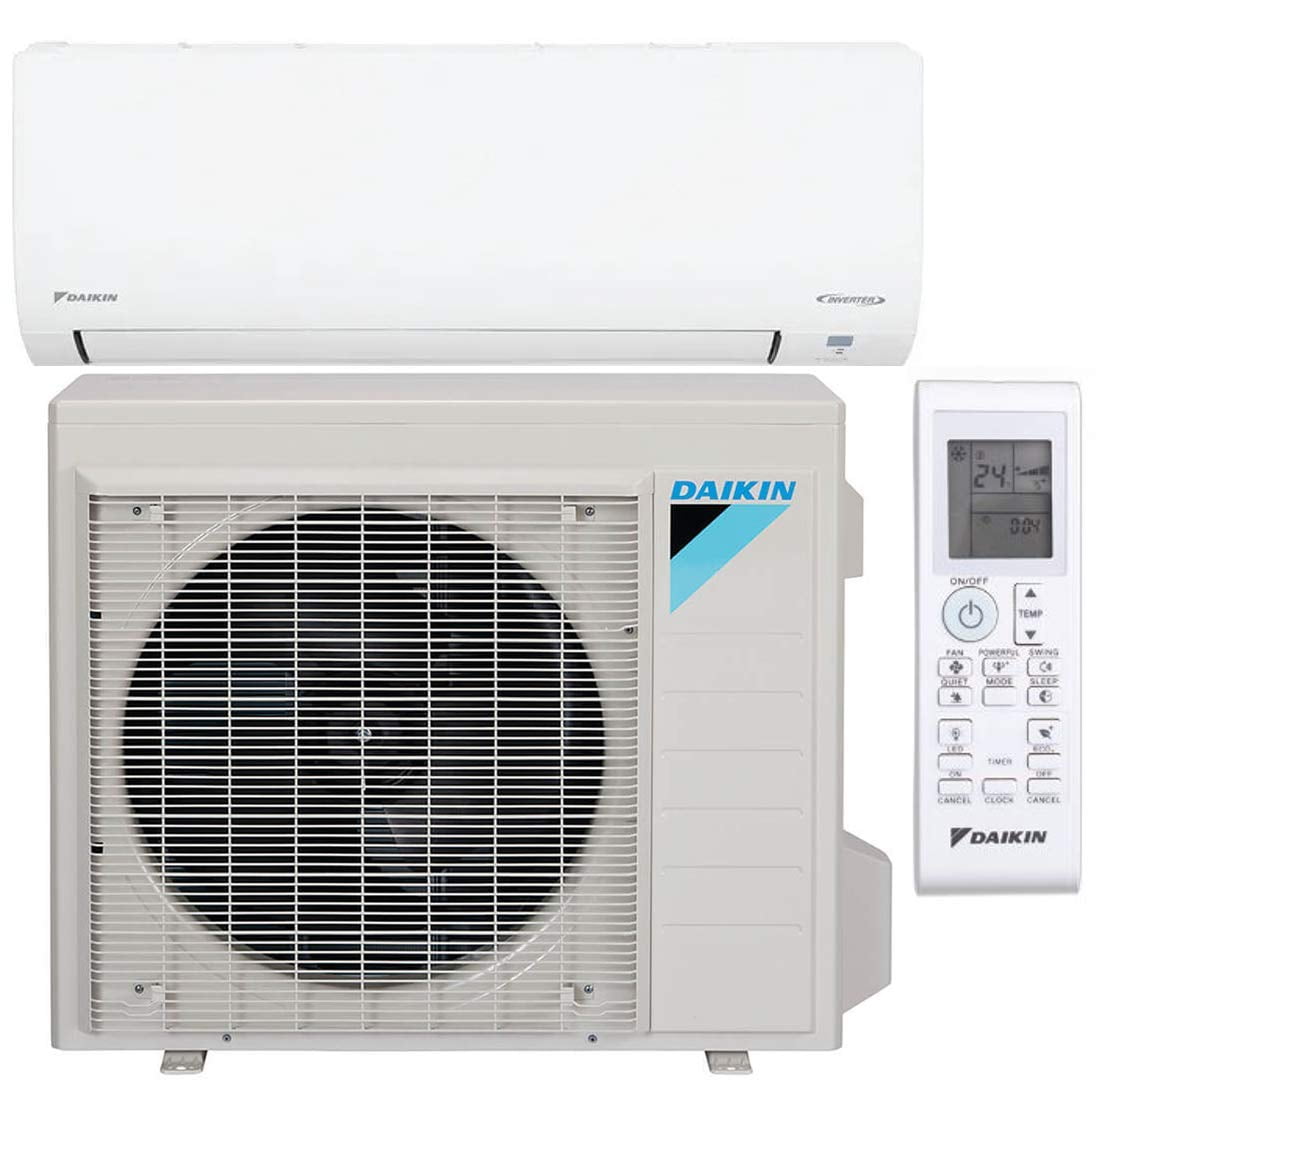 Daikin Mini Split Single Zone Air Conditioner Cooling Only Seer